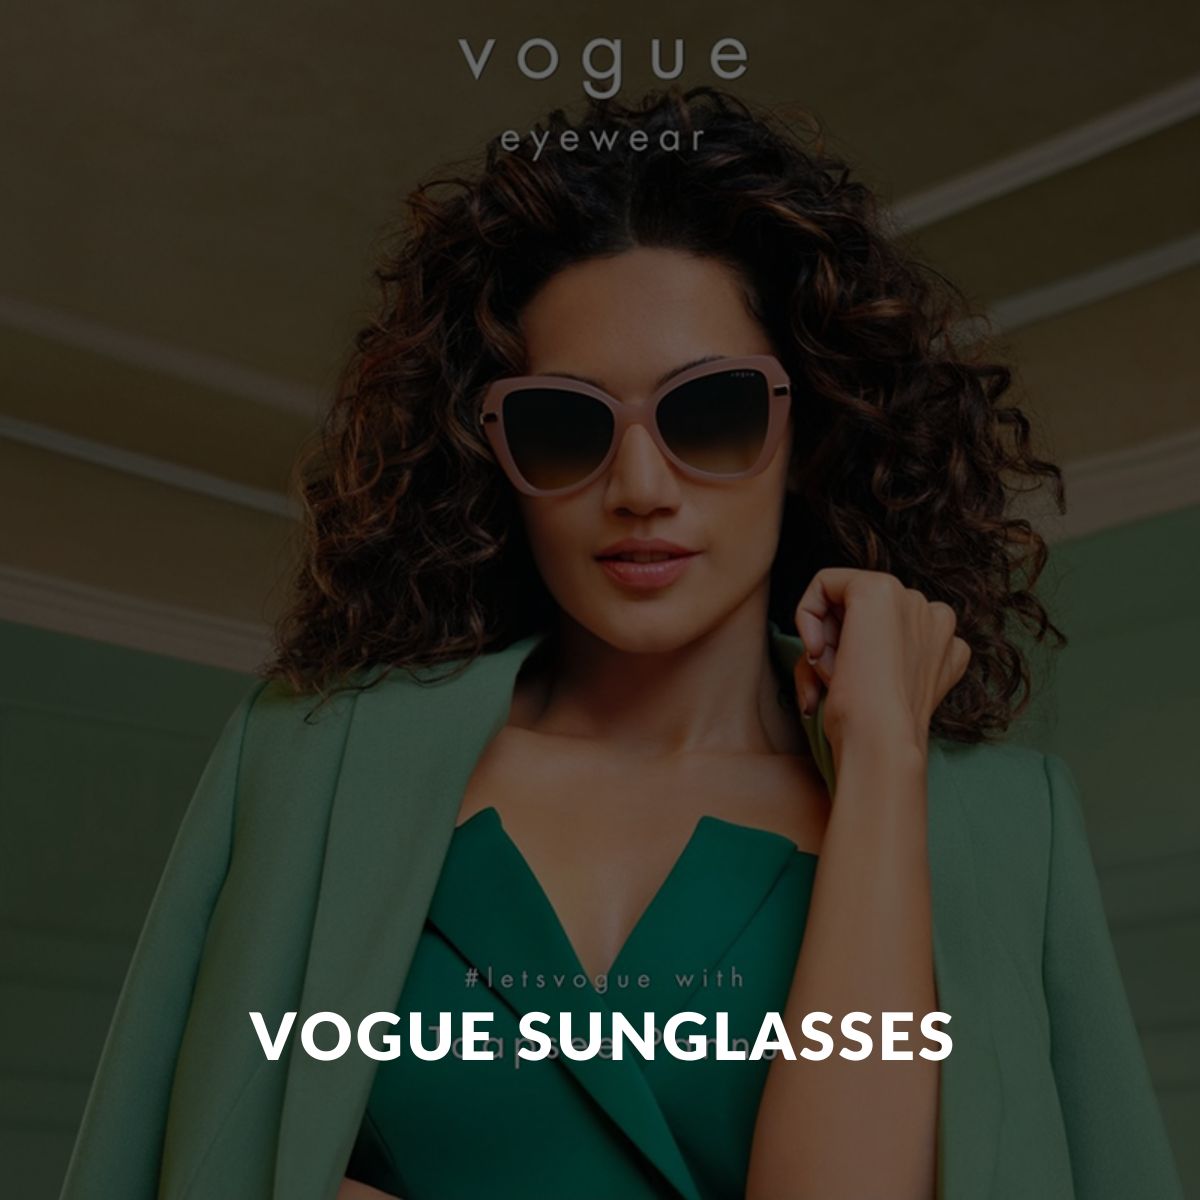 "Explore Optorium's trendy Vogue sunglasses collection for men and women, featuring stylish shades to elevate your fashion while protecting from the sun. Fast shipping and easy returns available."